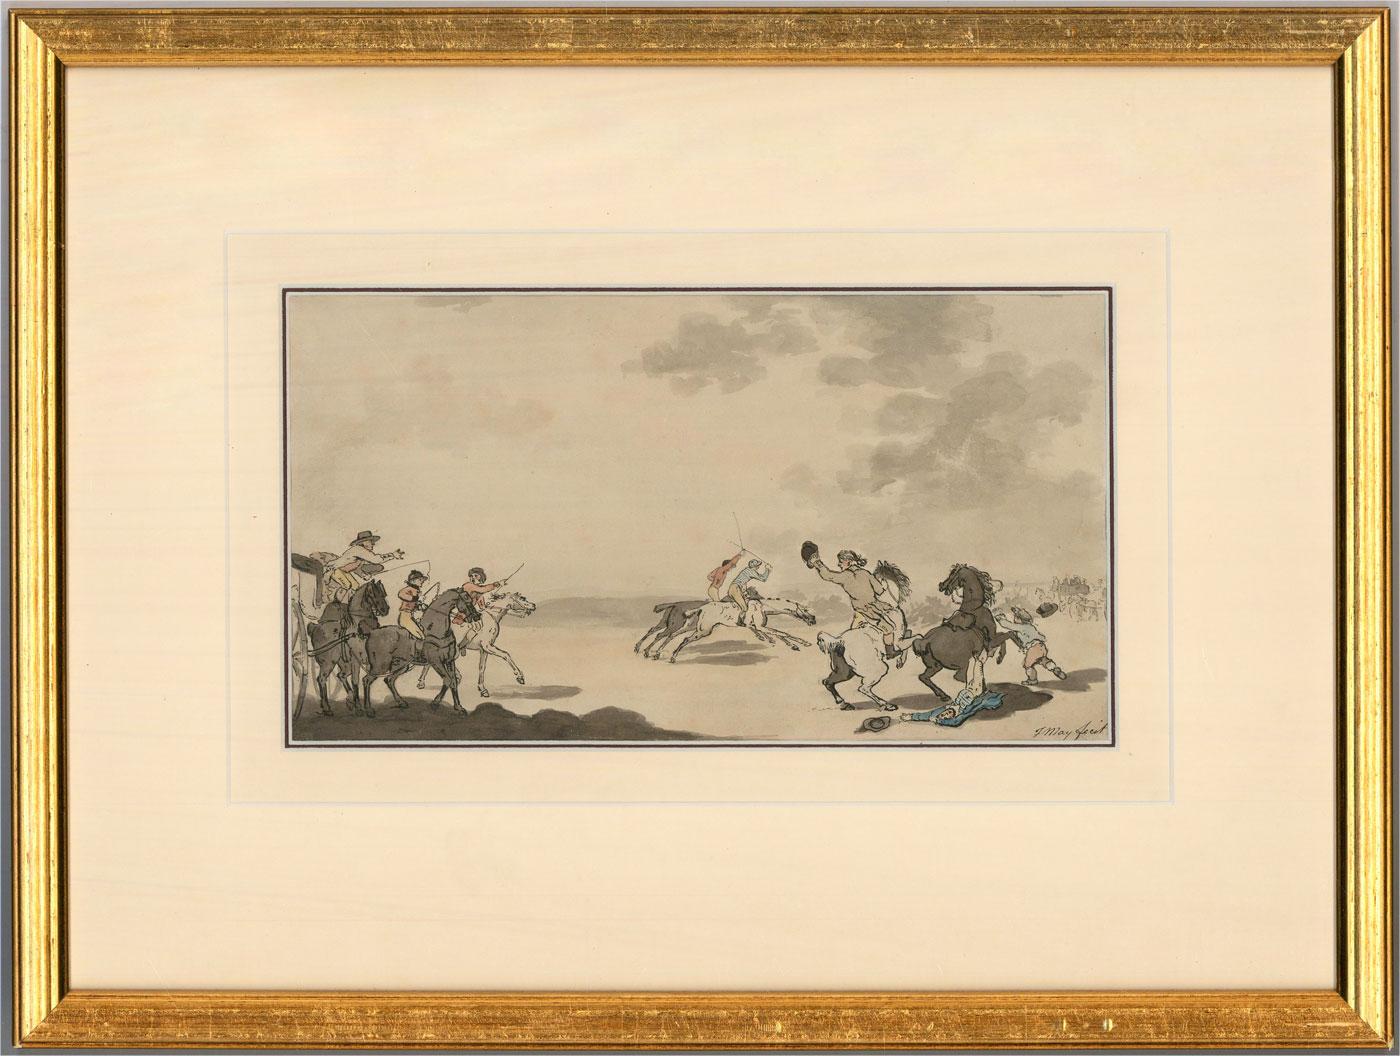 A delightful ink illustration of a steeple chase taking place while spectators watch on. Signed to the lower right and well presented in a double card mount and gilt frame. On wove.